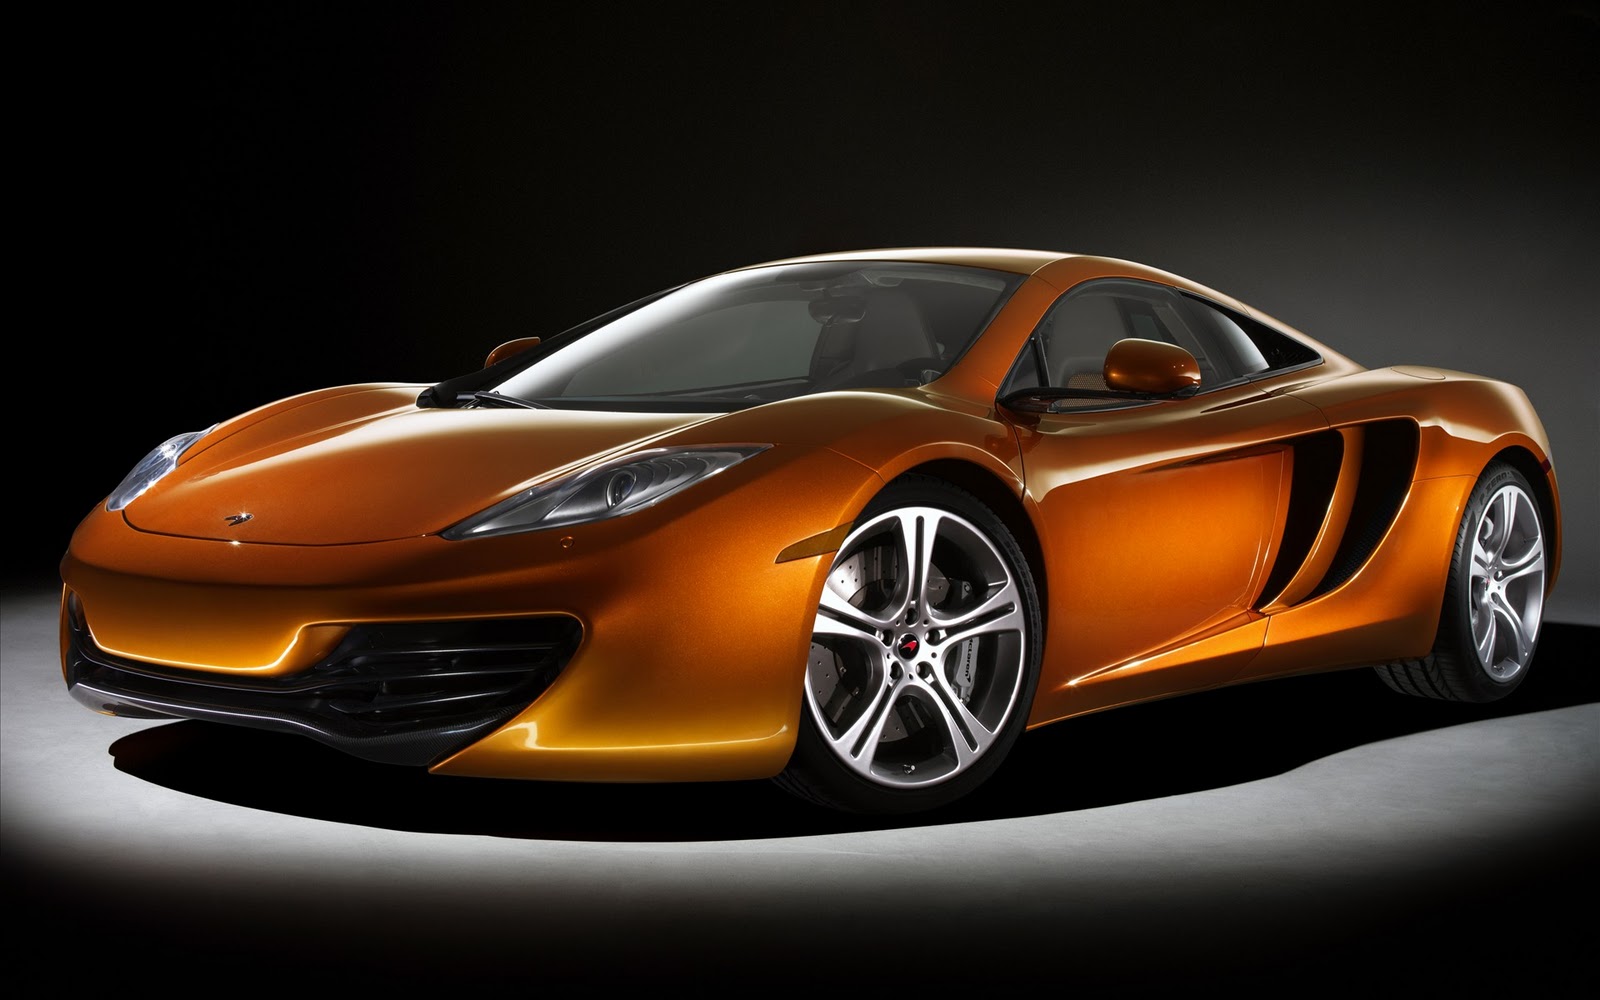 New Car Photo Cool cars wallpapers 2011